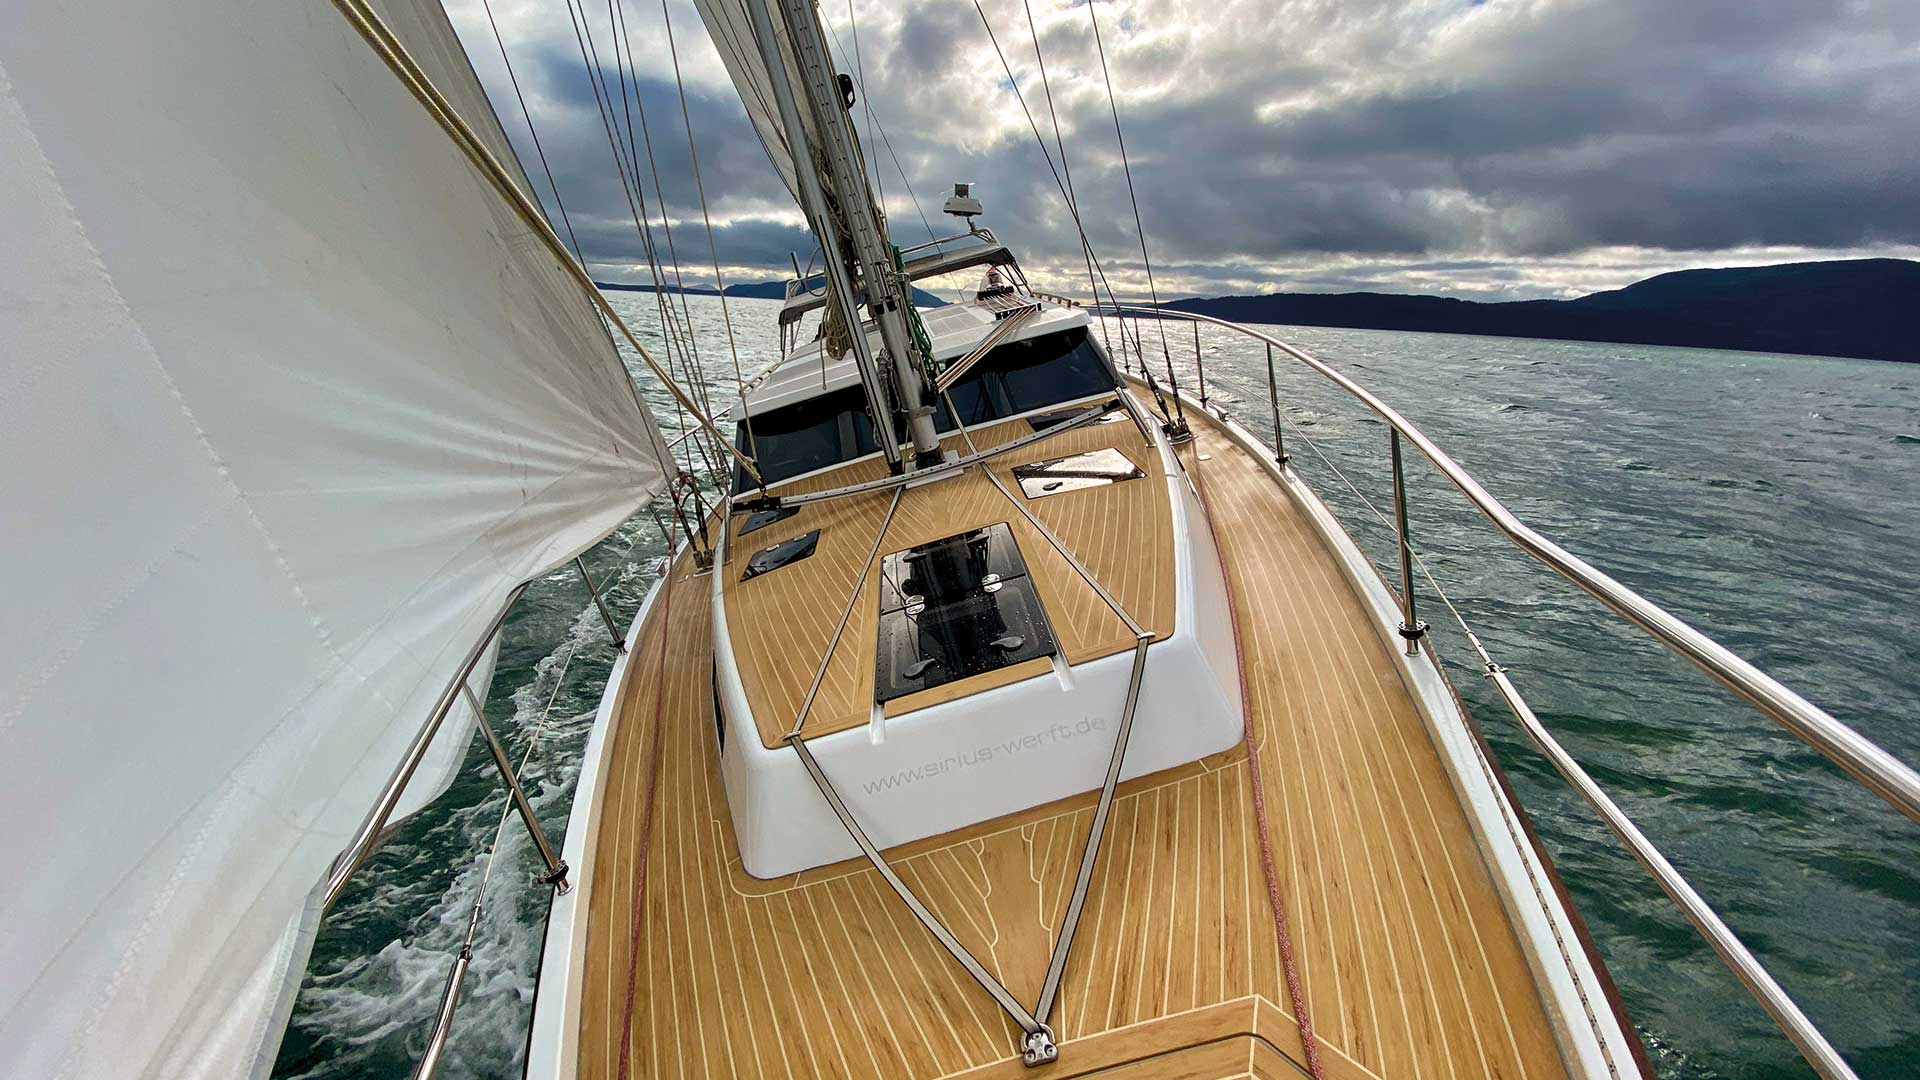 The Sirius 40 Deck Saloon (DS)